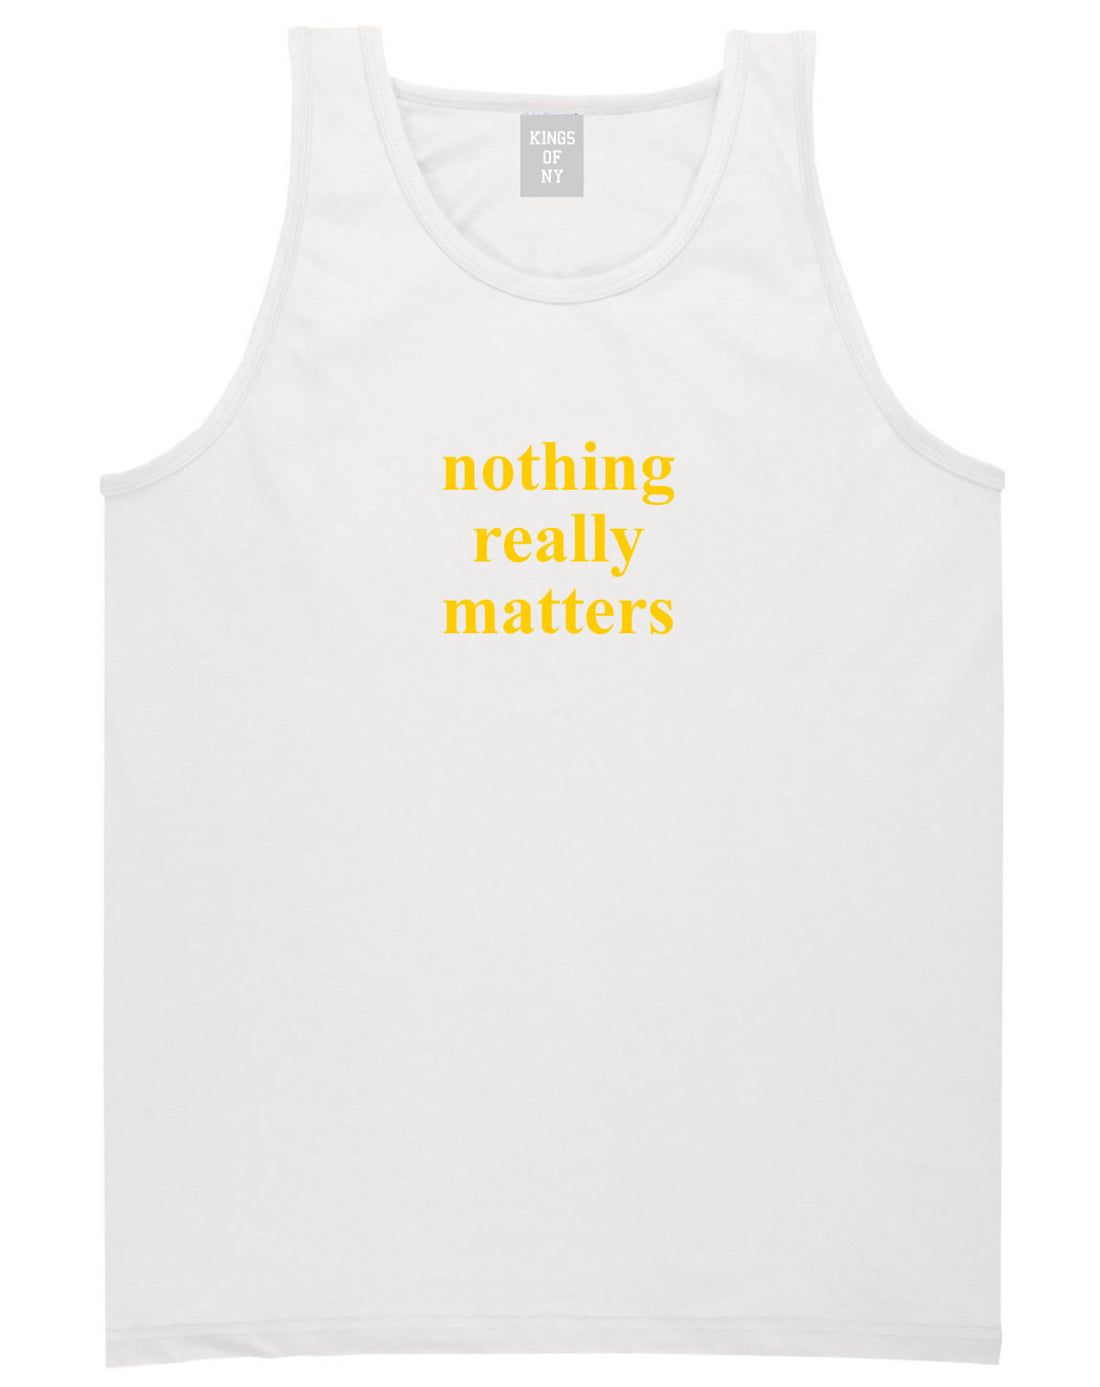 Nothing Really Matters Mens Tank Top Shirt White By Kings Of NY